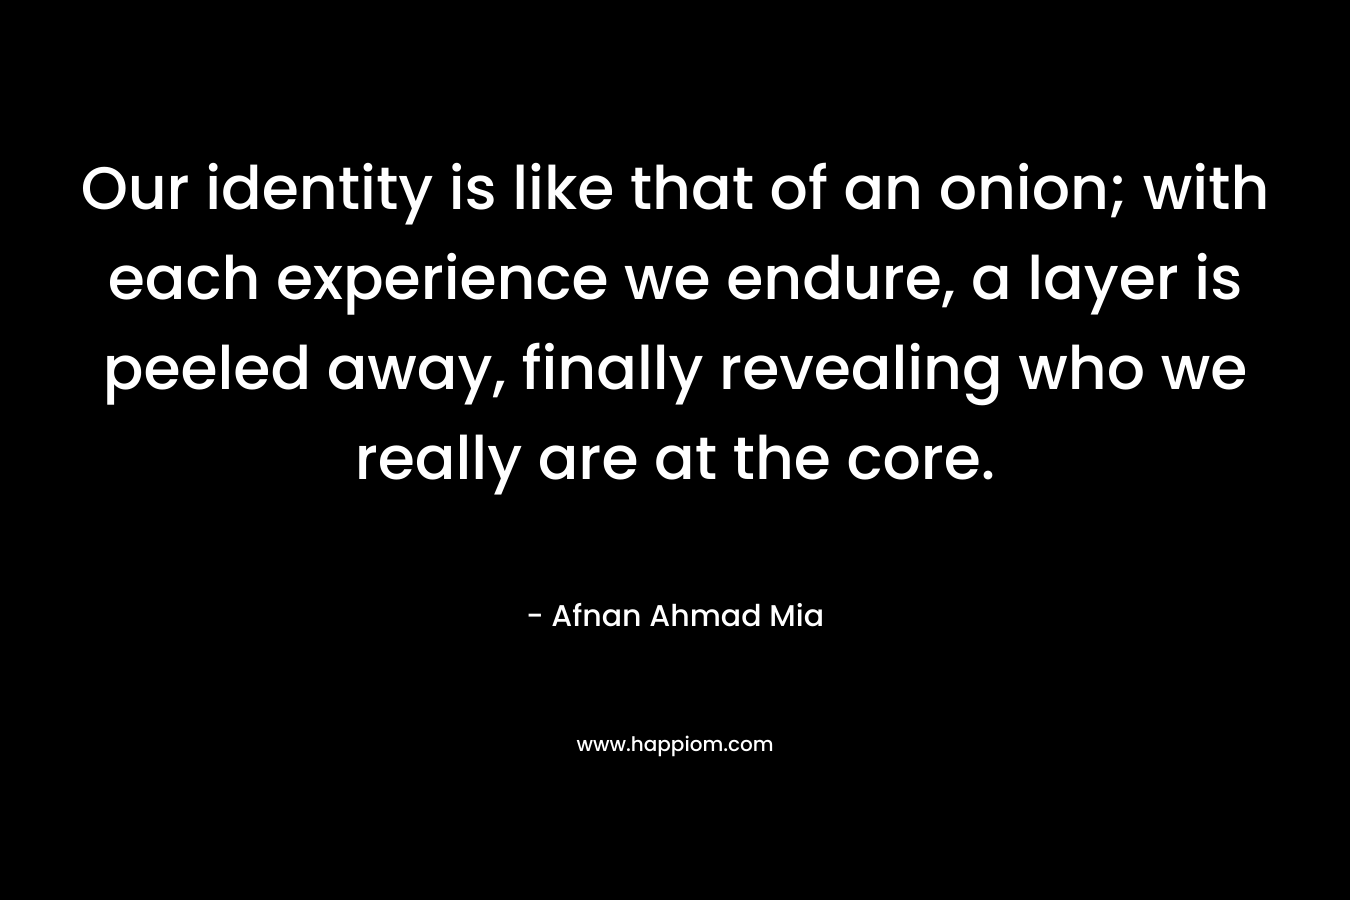 Our identity is like that of an onion; with each experience we endure, a layer is peeled away, finally revealing who we really are at the core. – Afnan Ahmad Mia